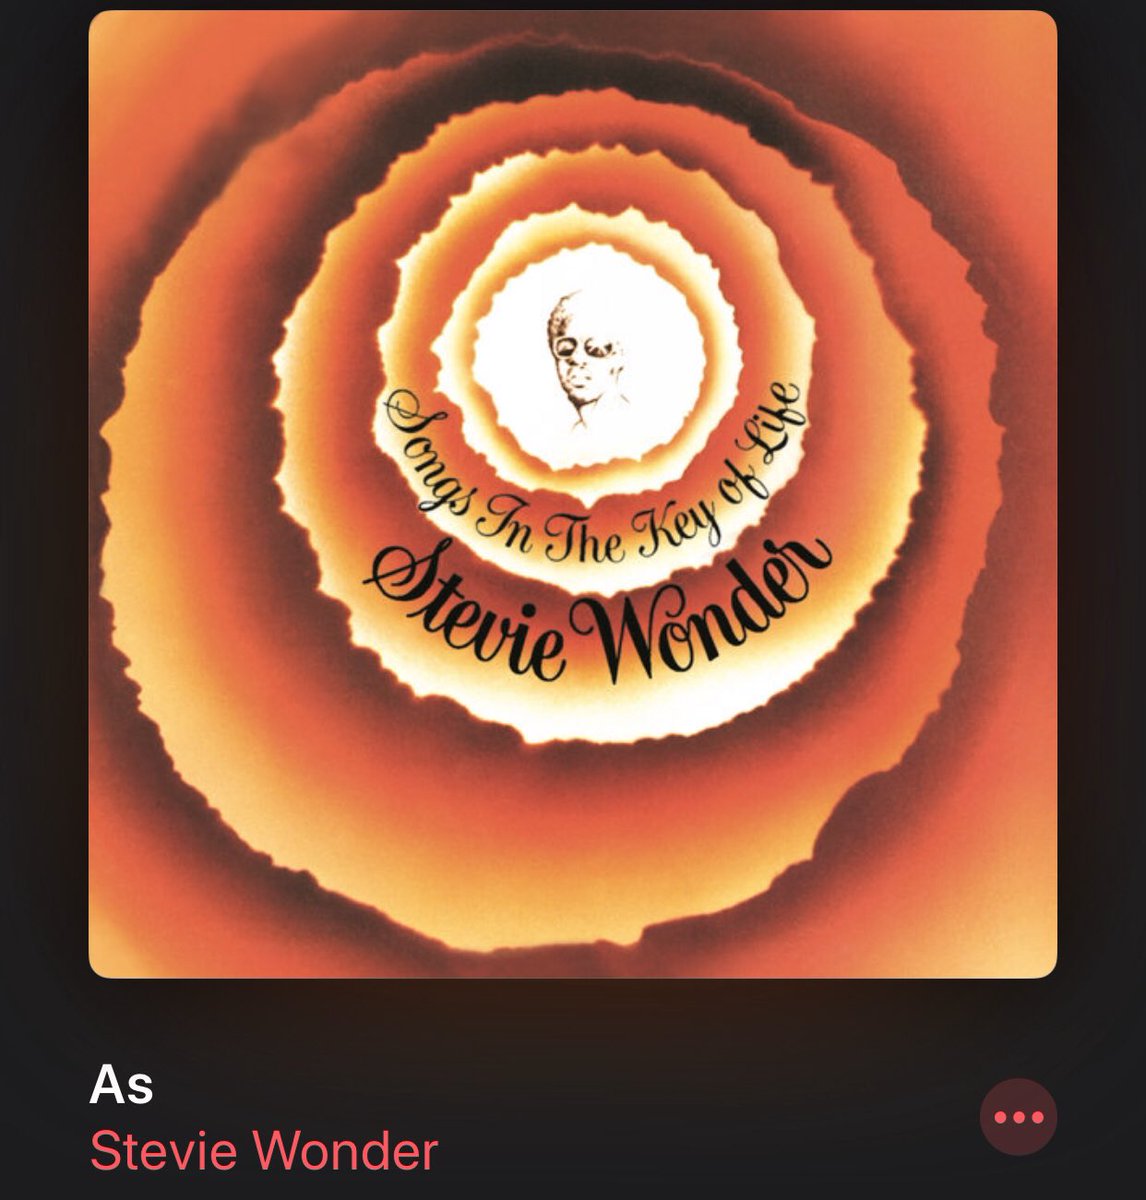 Can you tell “Songs in the Key of Life” is my favorite Stevie album?“As” is yet another perfect song.So beautifully written. A dedication to undying love. **I’d love the vinyl for my bday on May 26th**